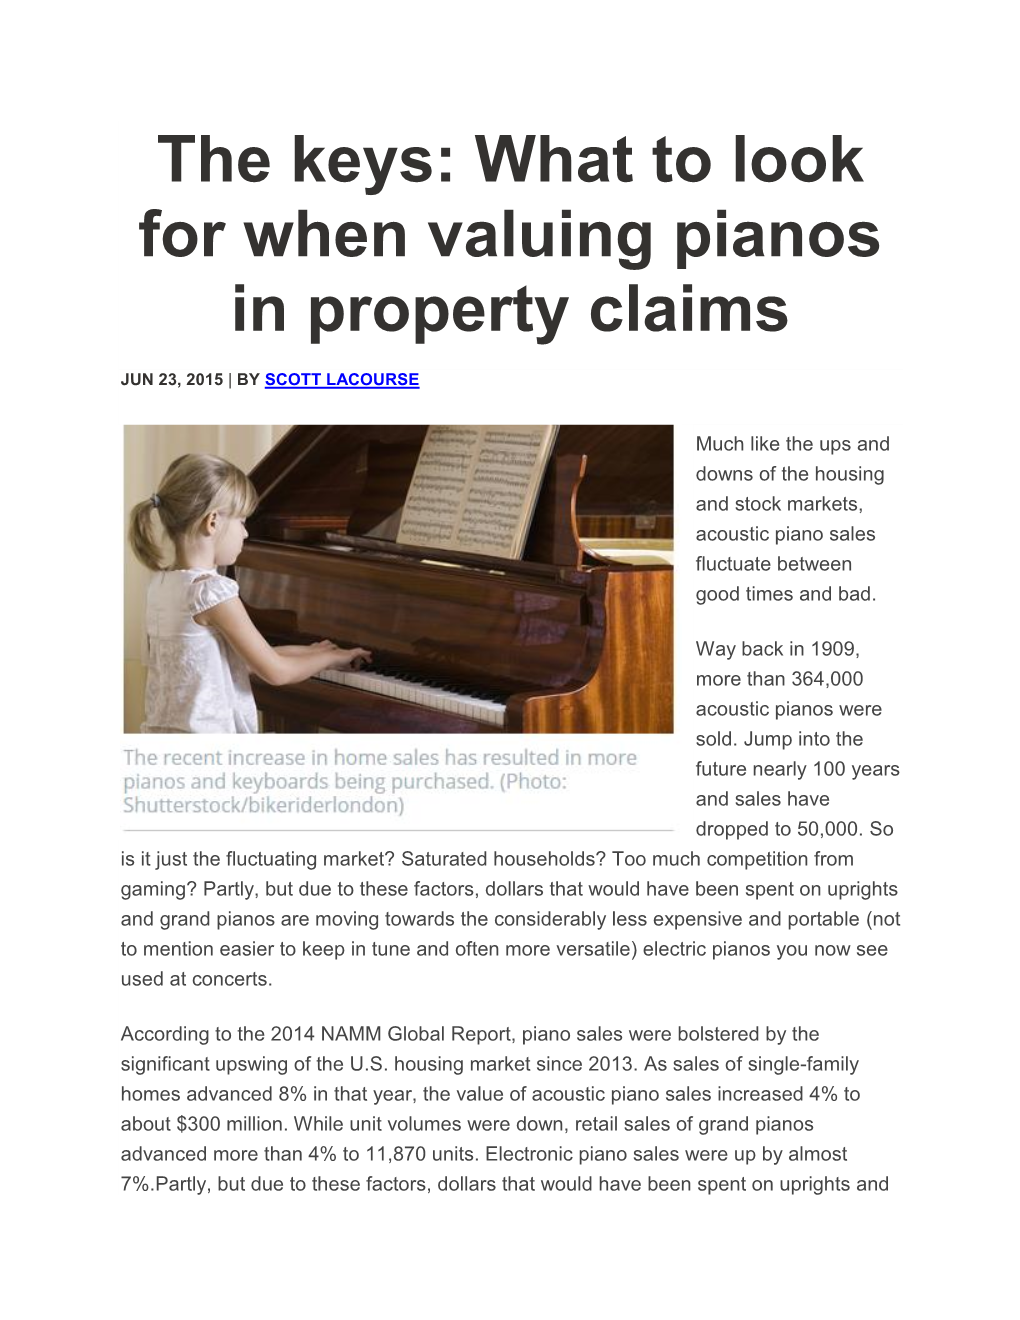 The Keys: What to Look for When Valuing Pianos in Property Claims